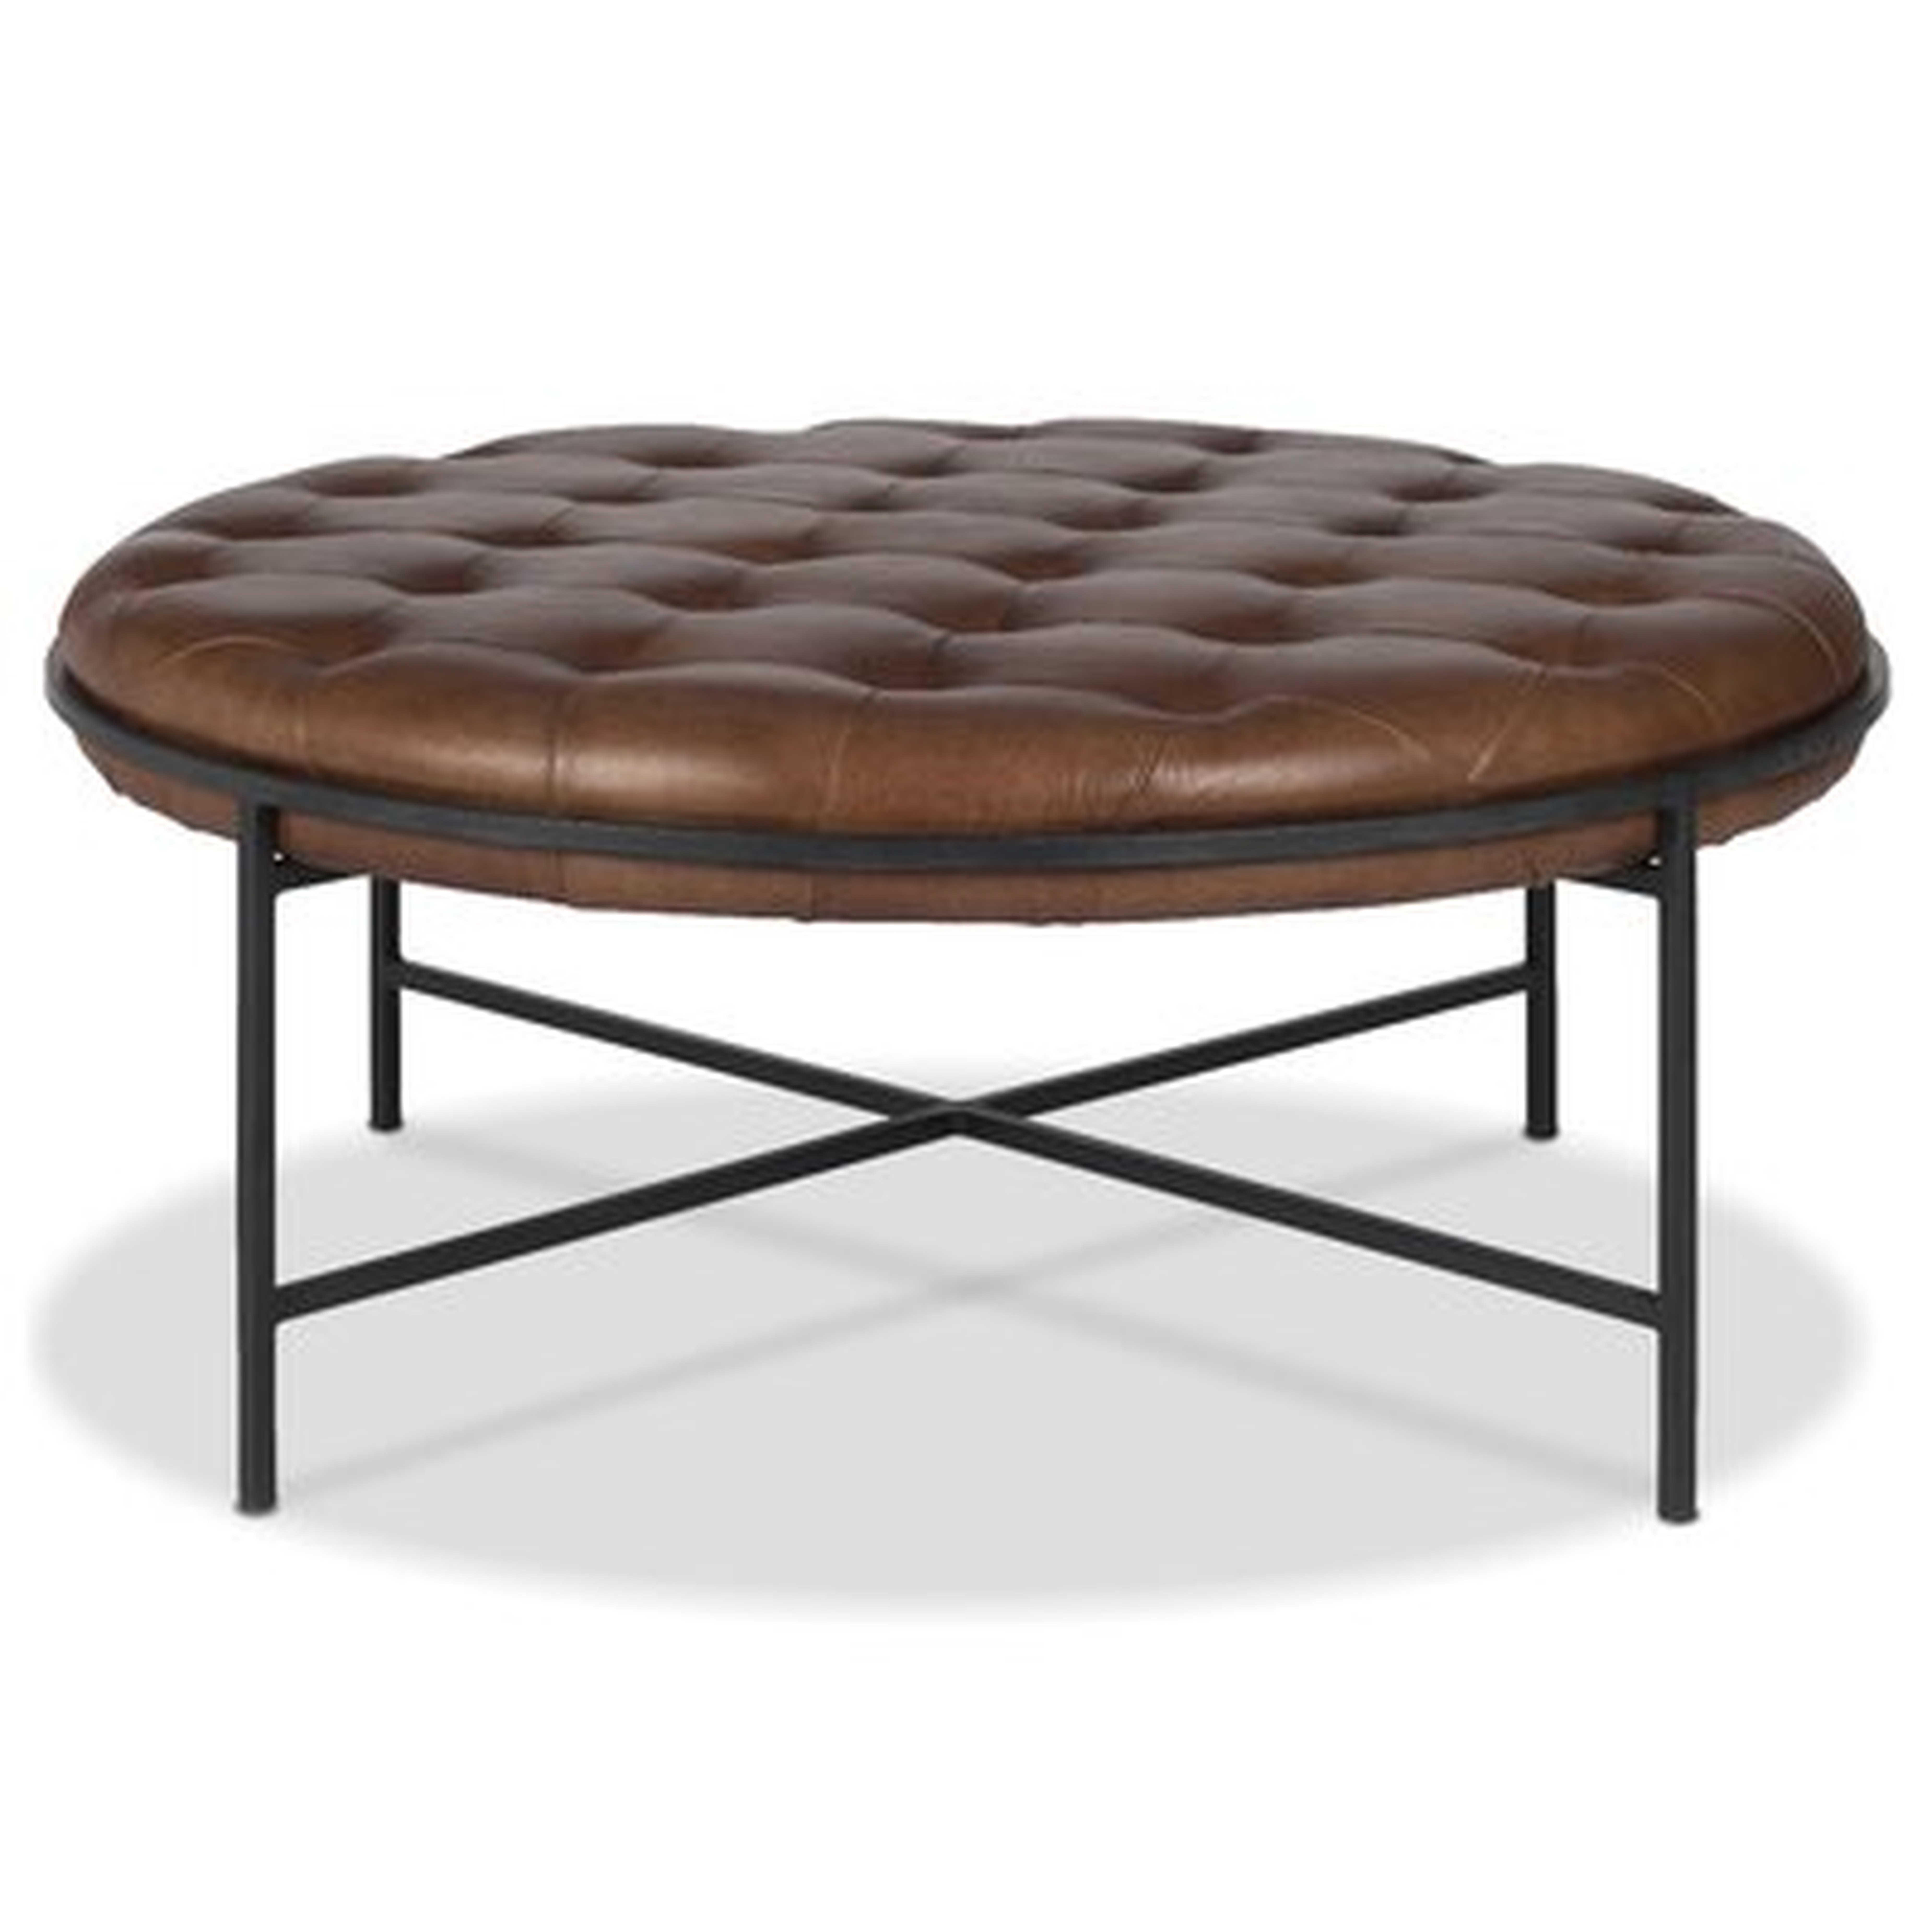 Evelyn 40" Wide Genuine Leather Tufted Round Cocktail Ottoman - Wayfair